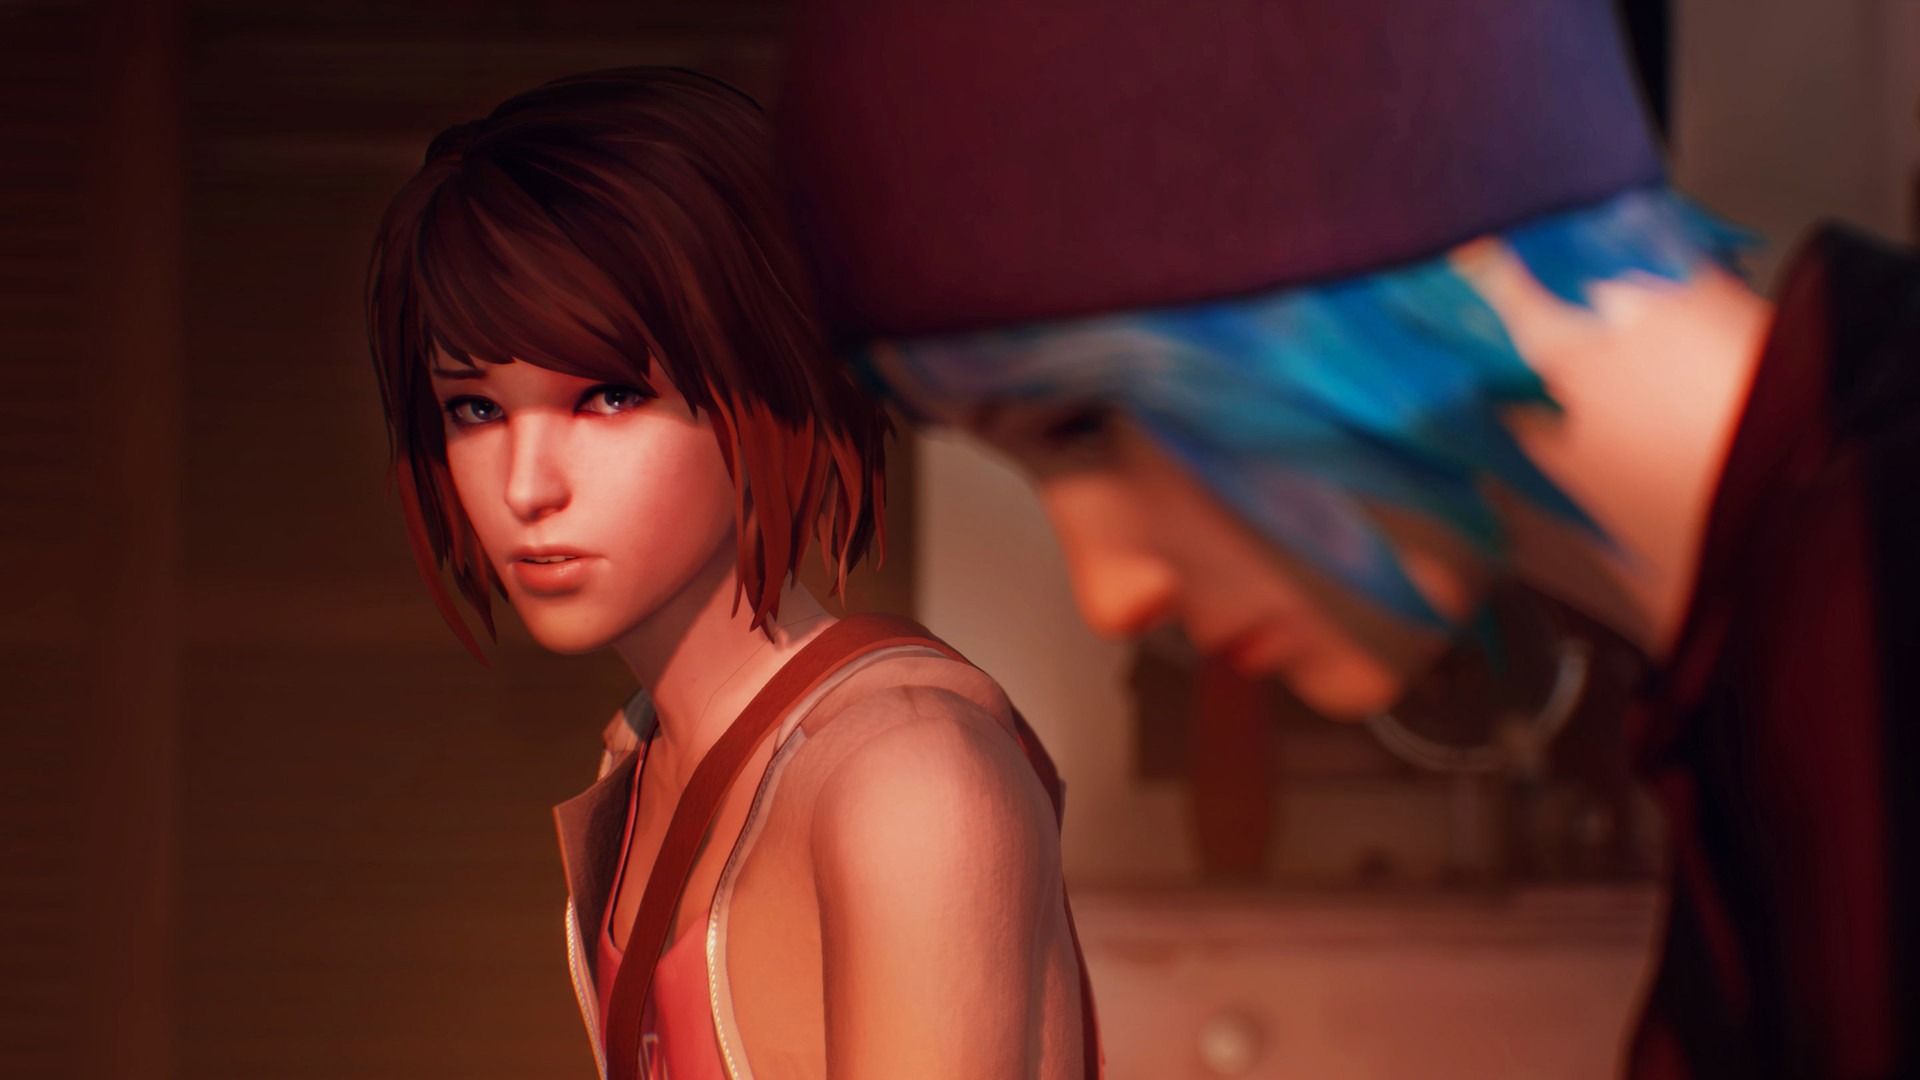 Buy cheap Life is Strange: True Colors Ultimate Edition cd key at the best price